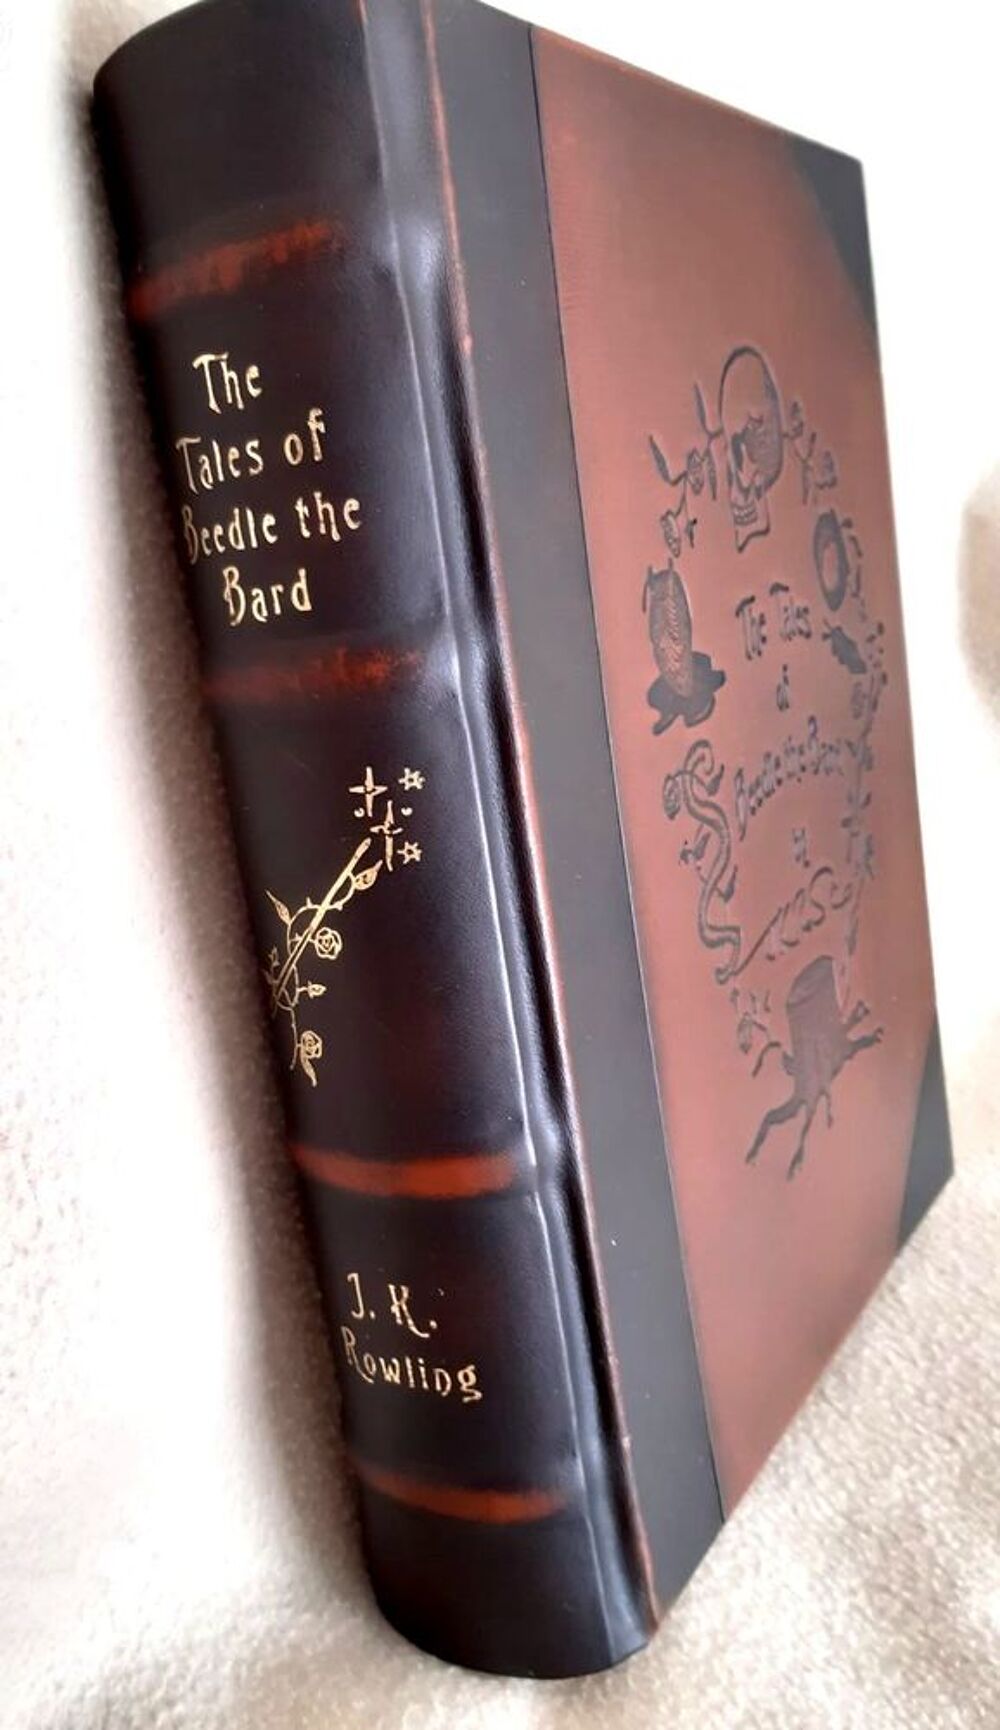 J.K. Rowling - The Tales of Beedle the Bard - Collector Livres et BD